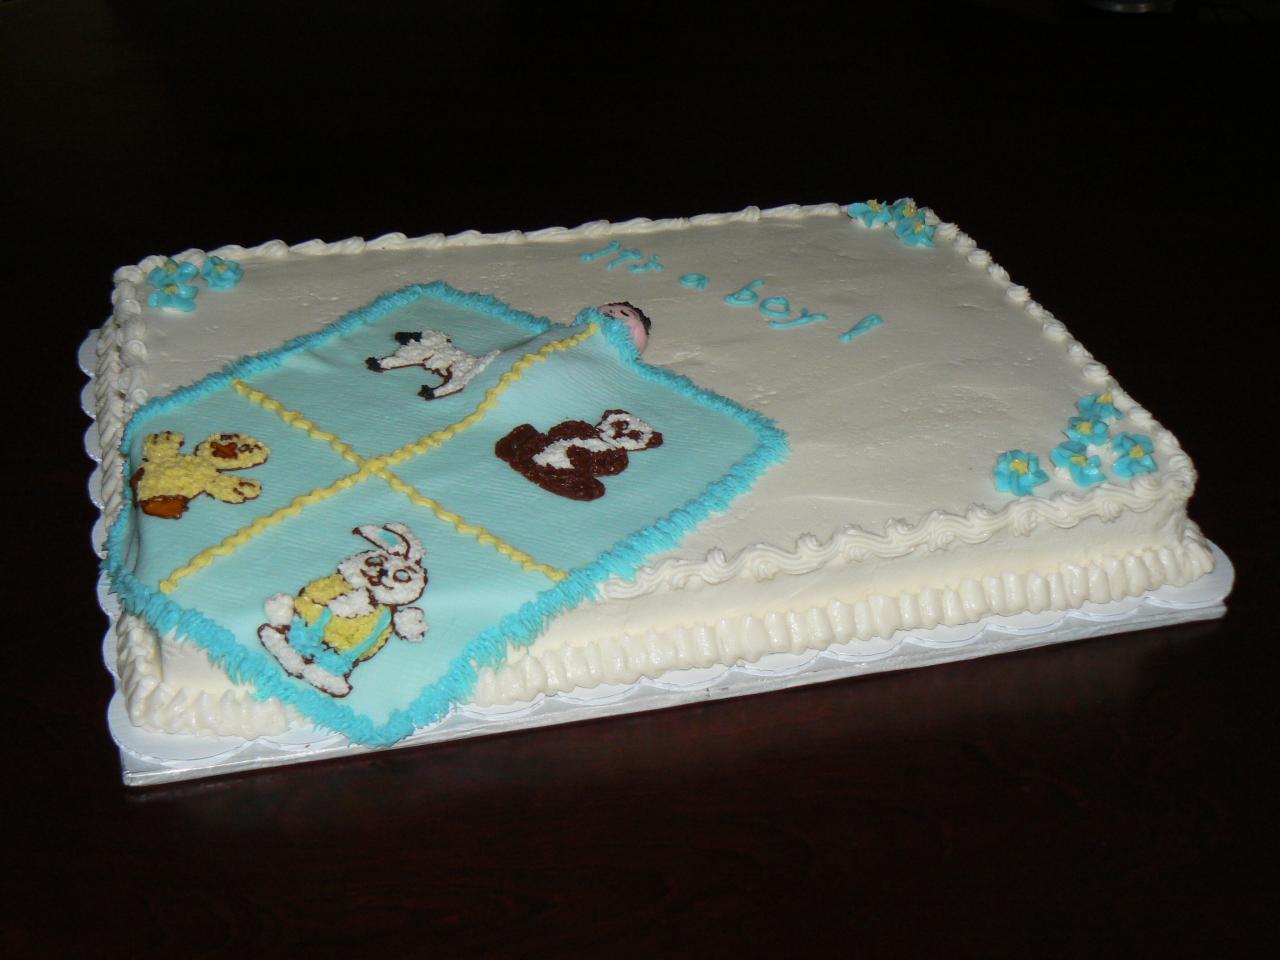 Baby Shower Cakes